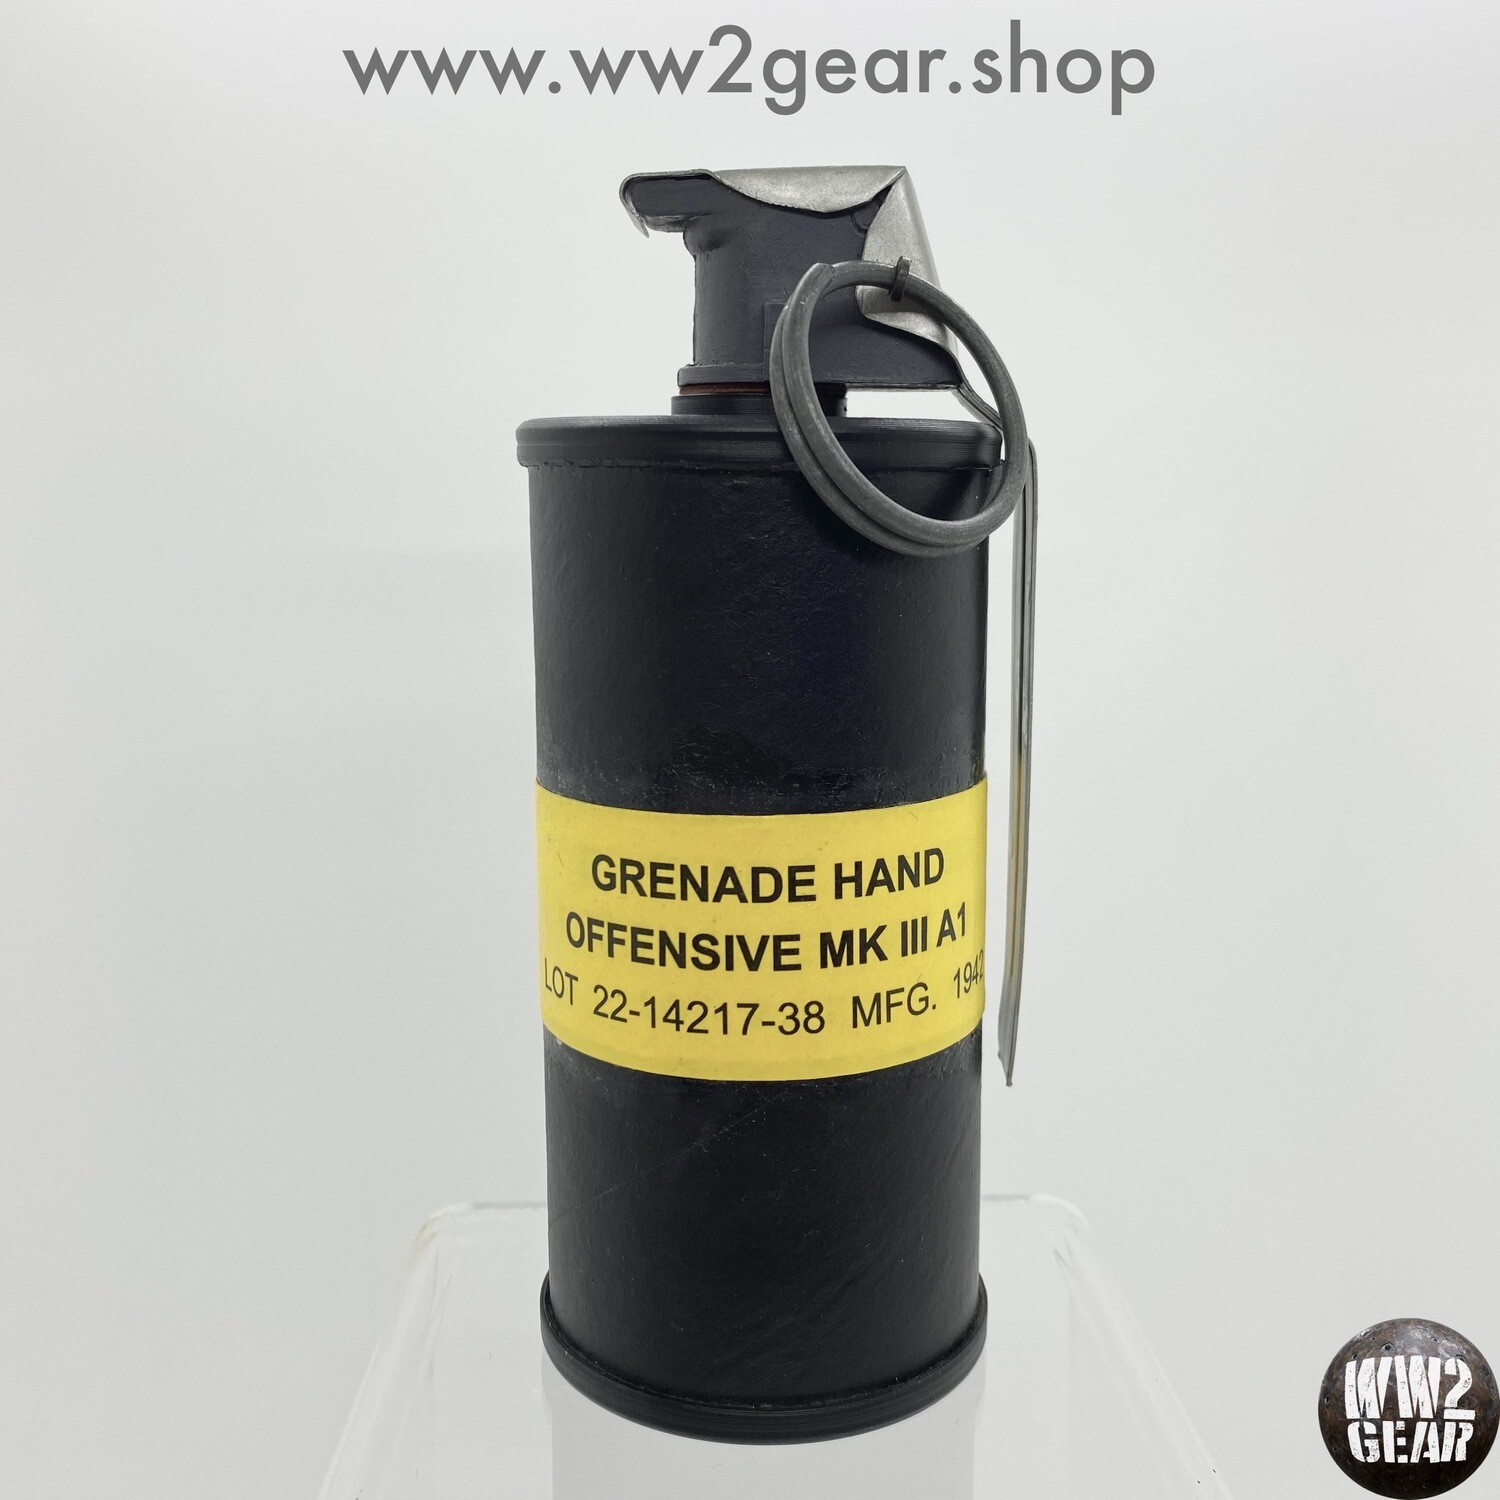 US WW2 MKIII A1 Offensive Grenade (Reproduction)